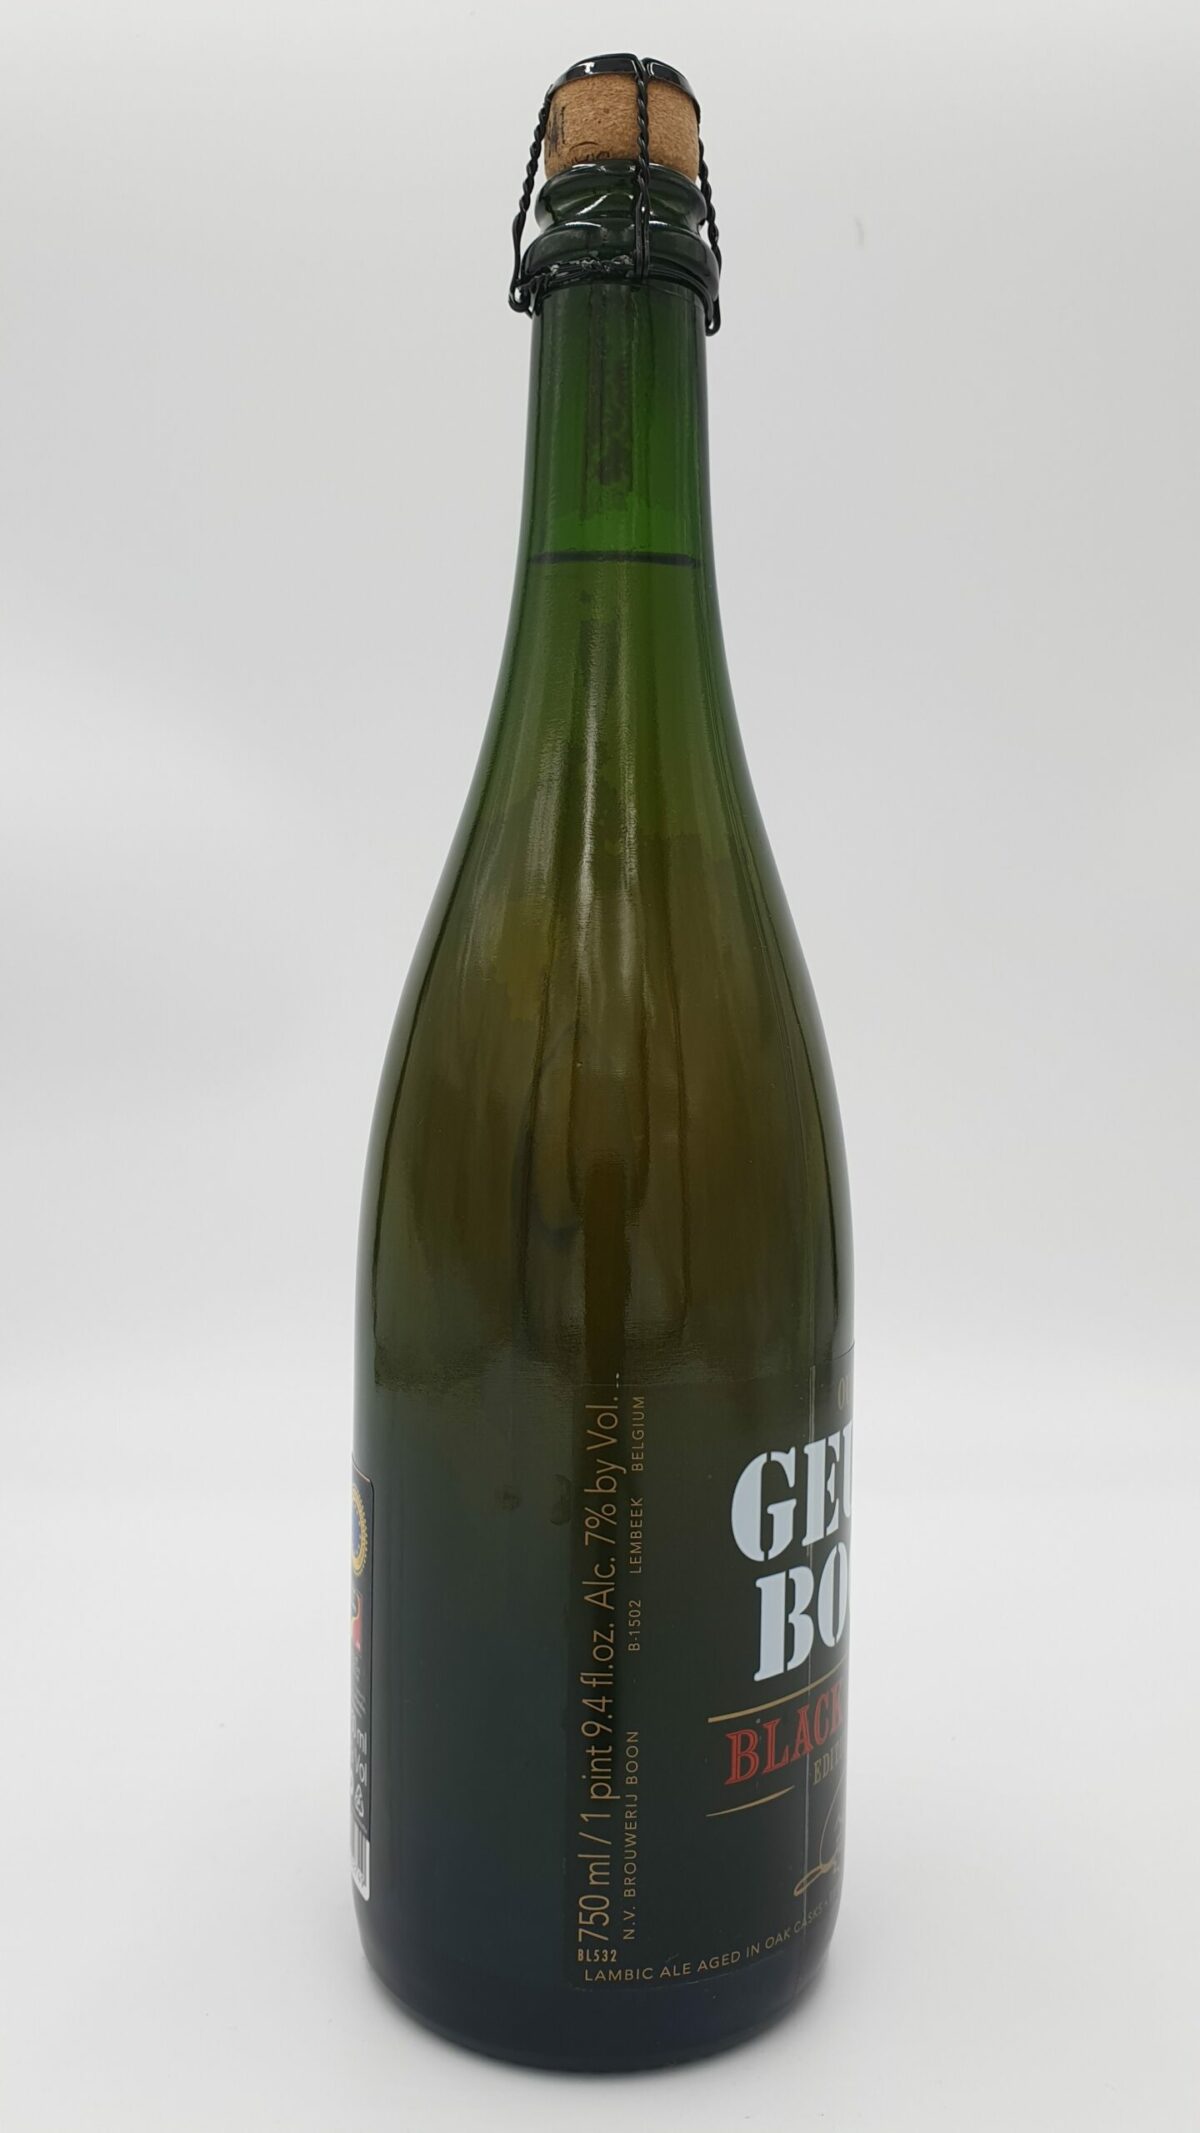 boon oude geuze black label edition 4